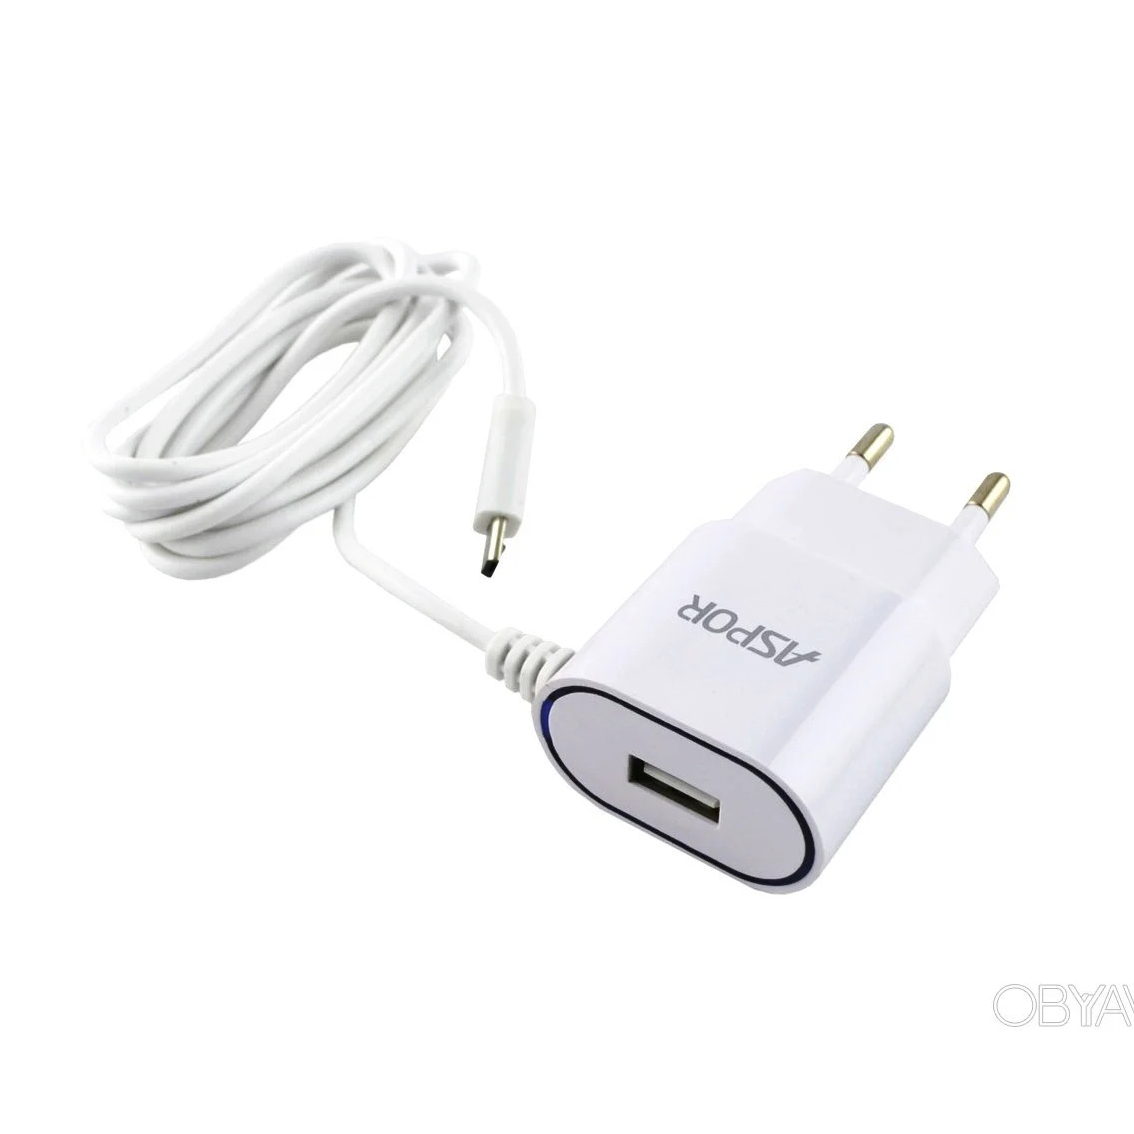 CHARGER 1USB FOR MOBILE&TAB ANDROID -ASPOR A802 شاحن مخرج واحد 2.4 مع كبل مدمج ,Smartphones & Tab Chargers